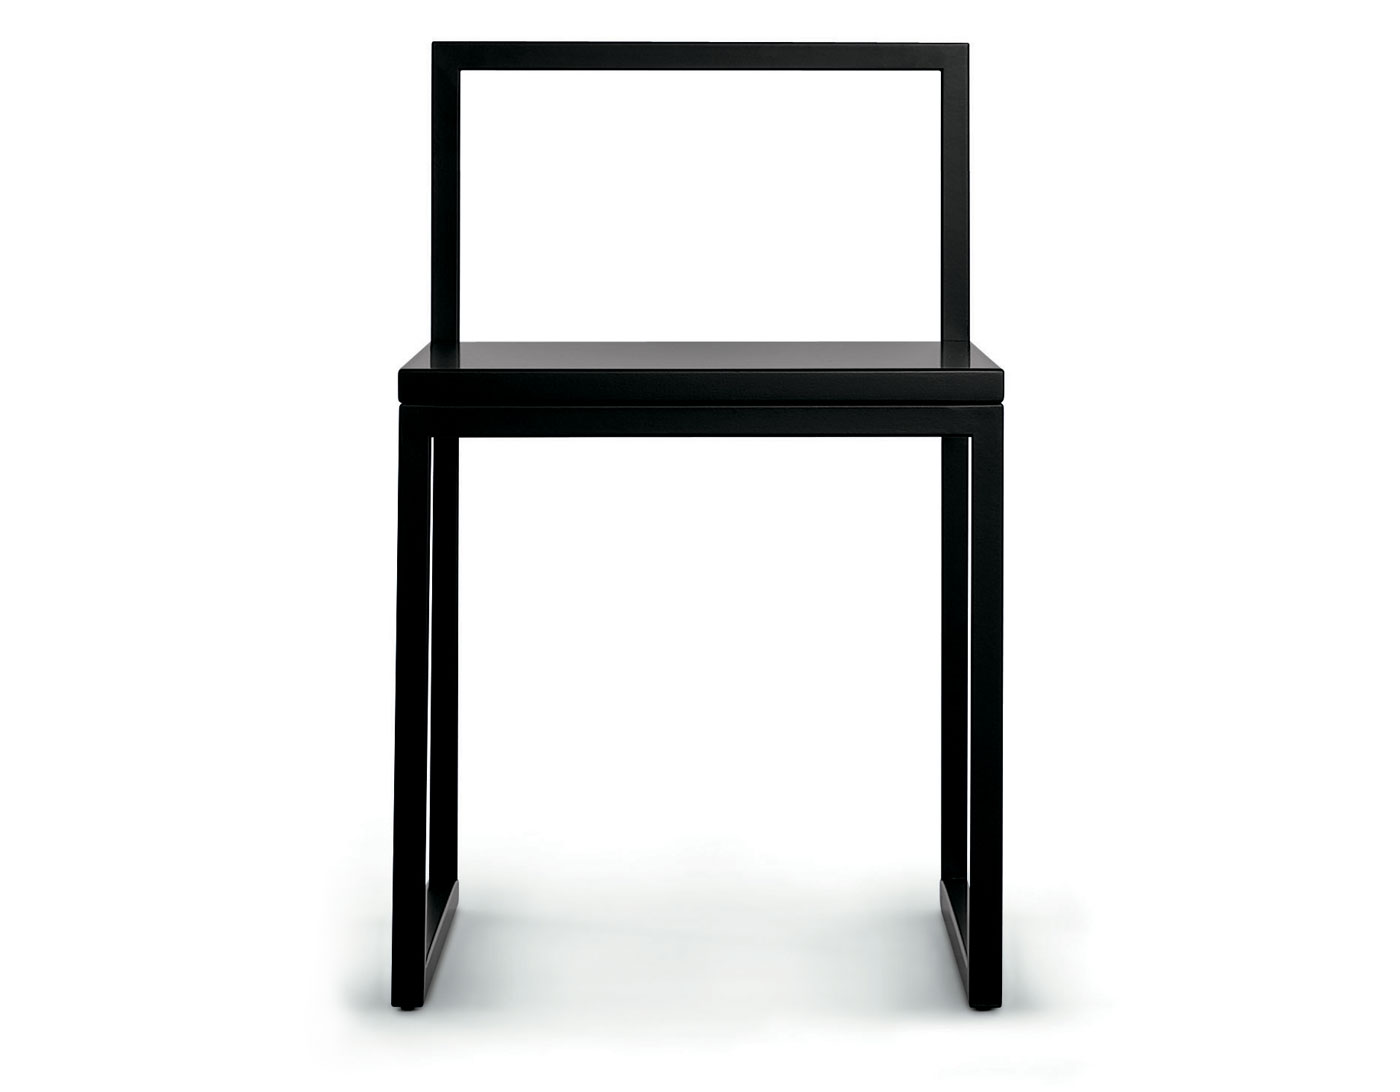 Fronzoni chair by A.G. Fronzoni for Cappellini | hive